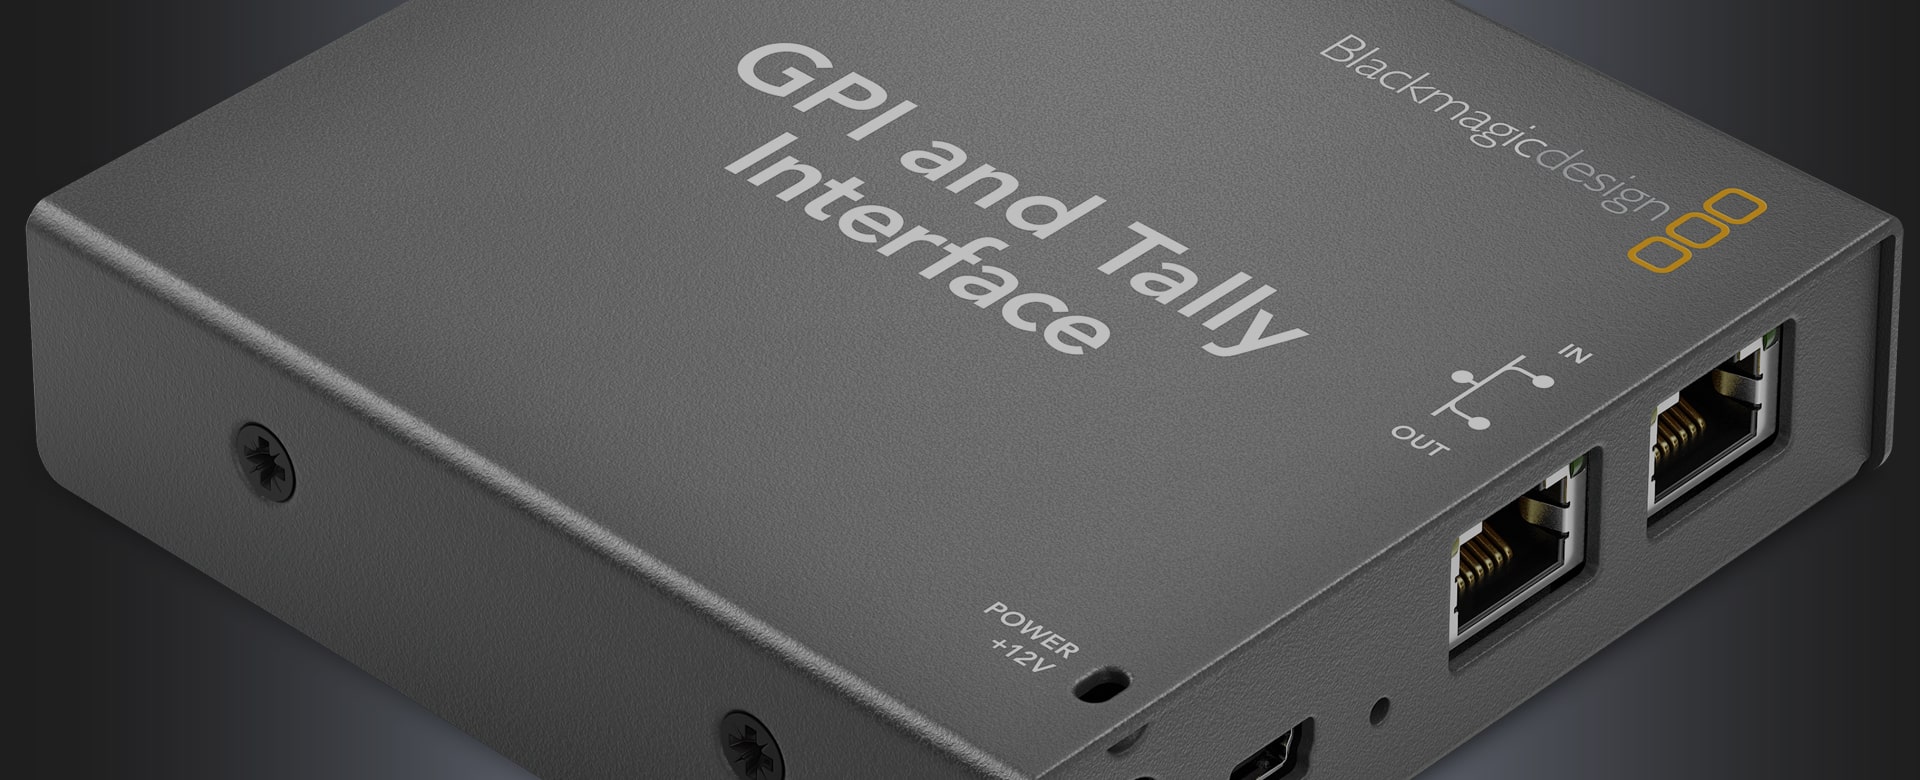 GPI and Tally Interface